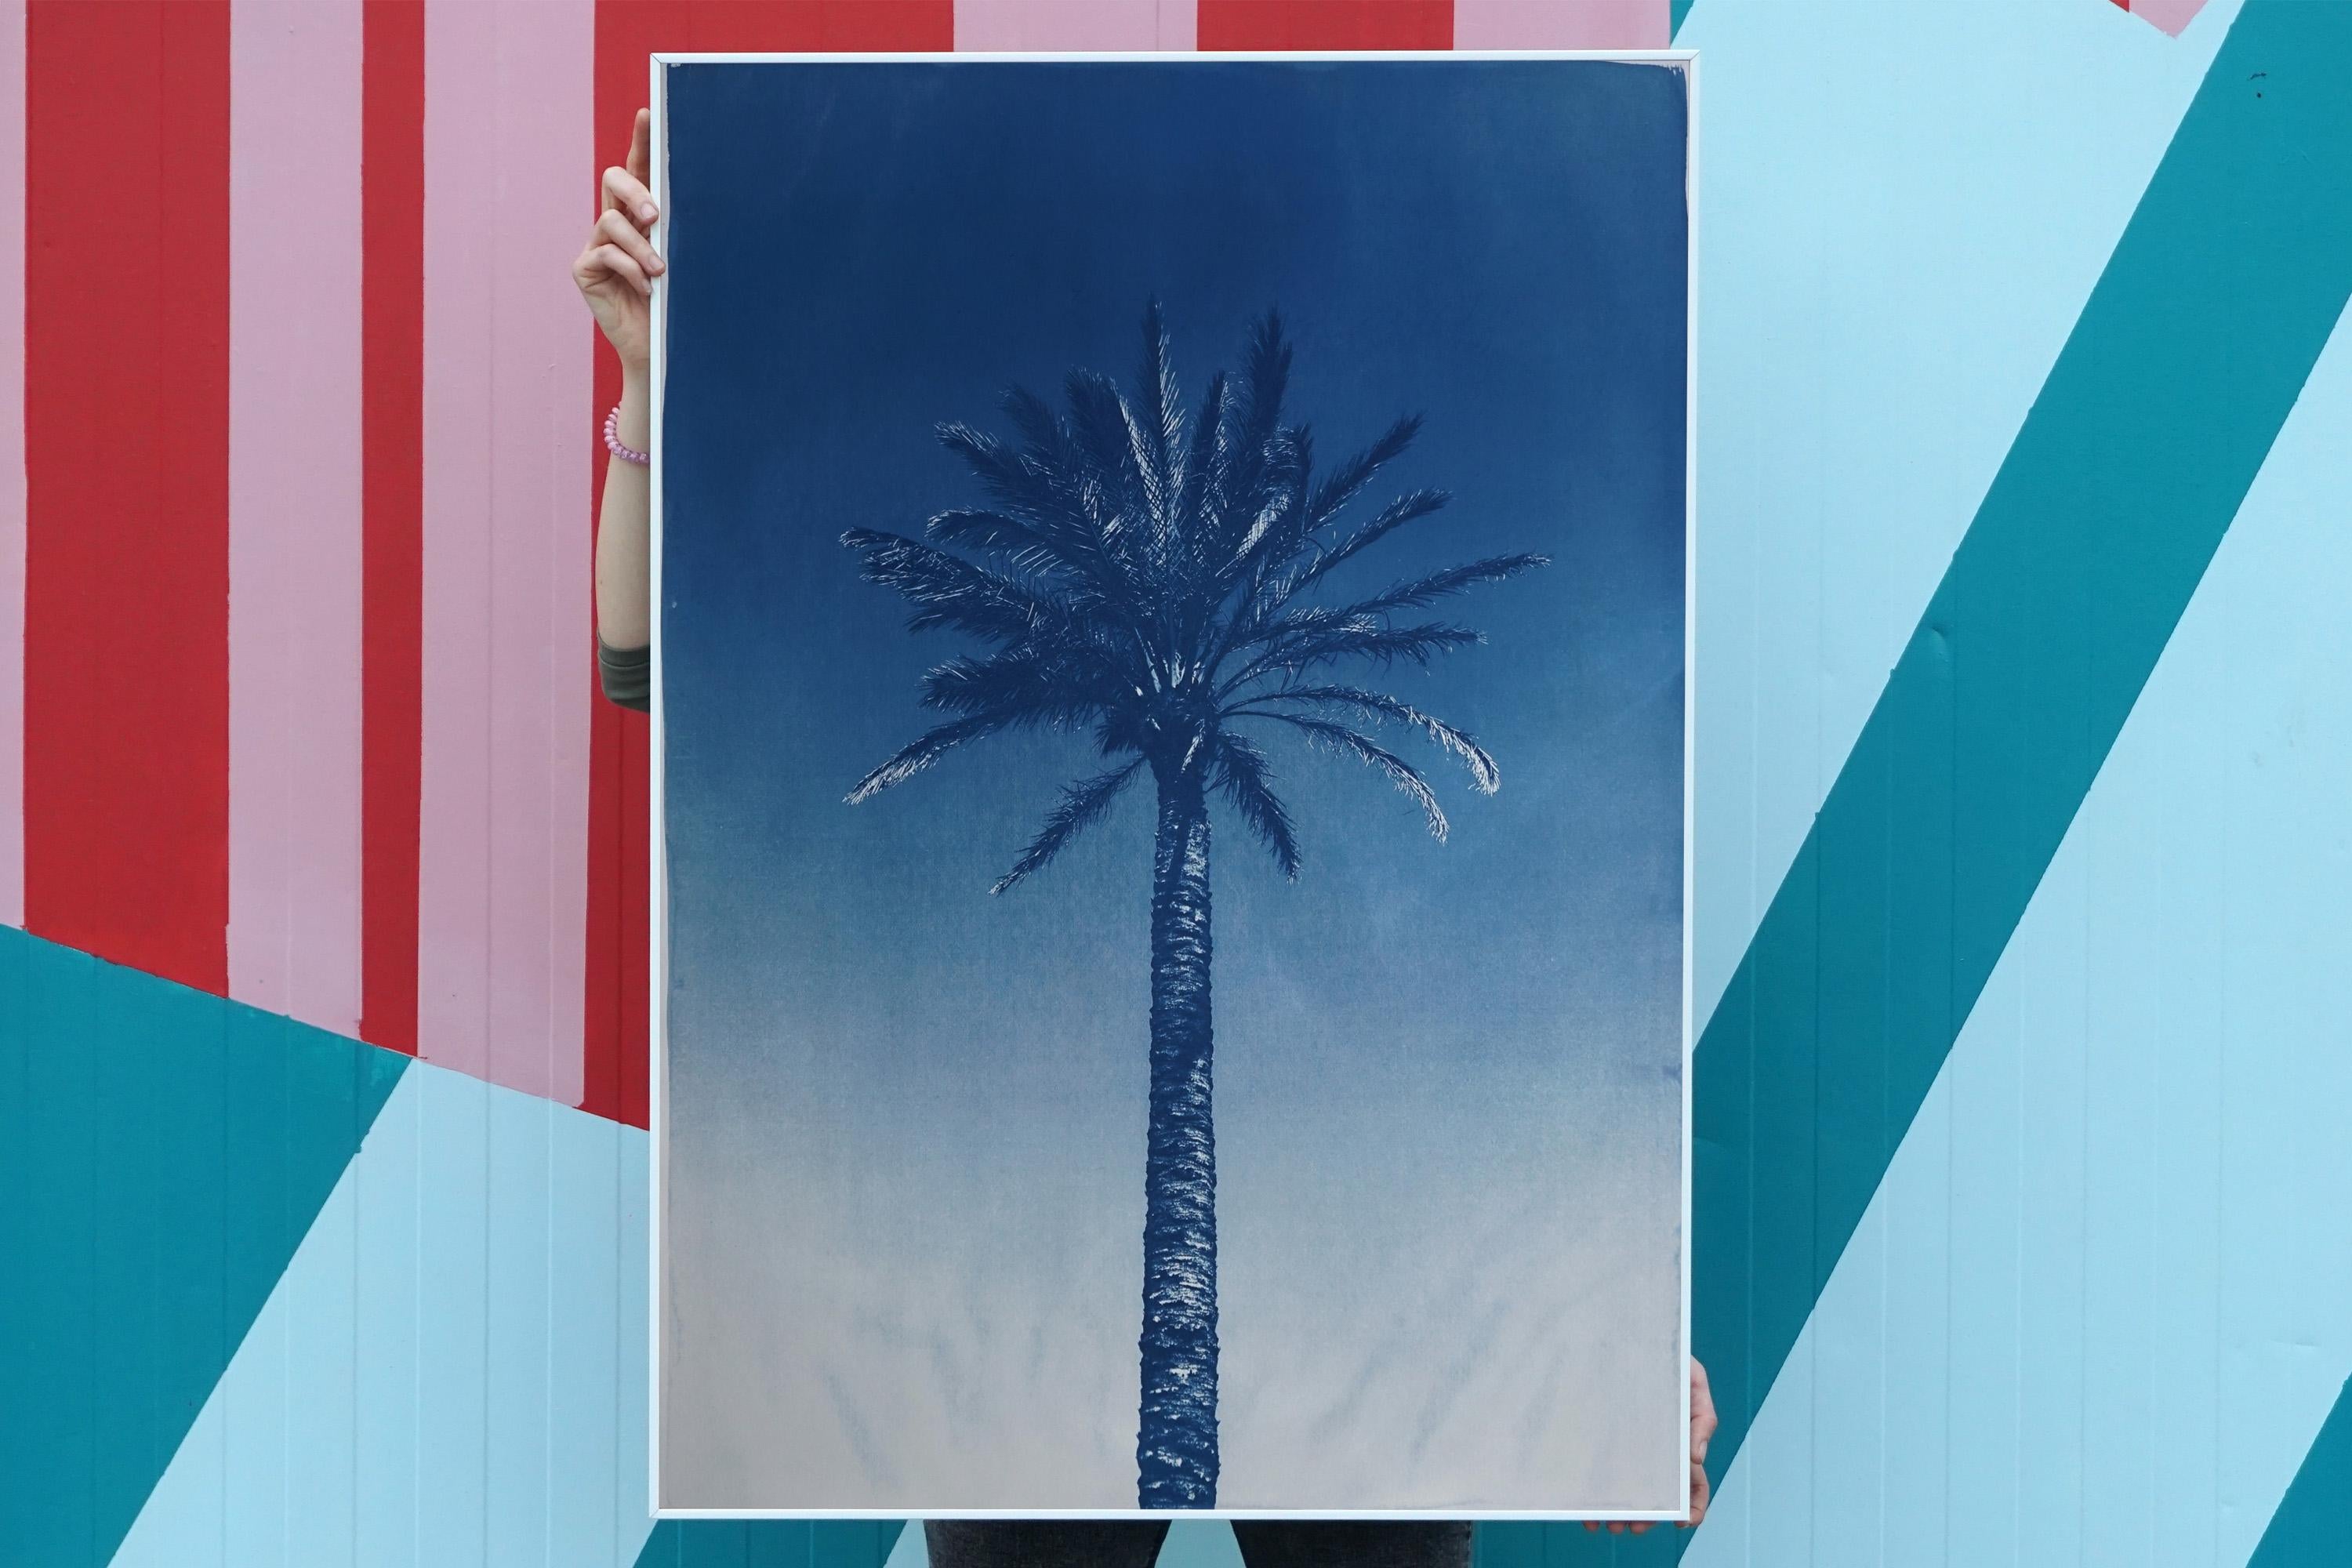 This is an exclusive handprinted limited edition cyanotype.
This cyanotype shows a desert palm tree from the banks of the nile River in Egypt. 

Details:
+ Title: Nile River Palm
+ Year: 2022
+ Edition Size: 50
+ Stamped and Certificate of